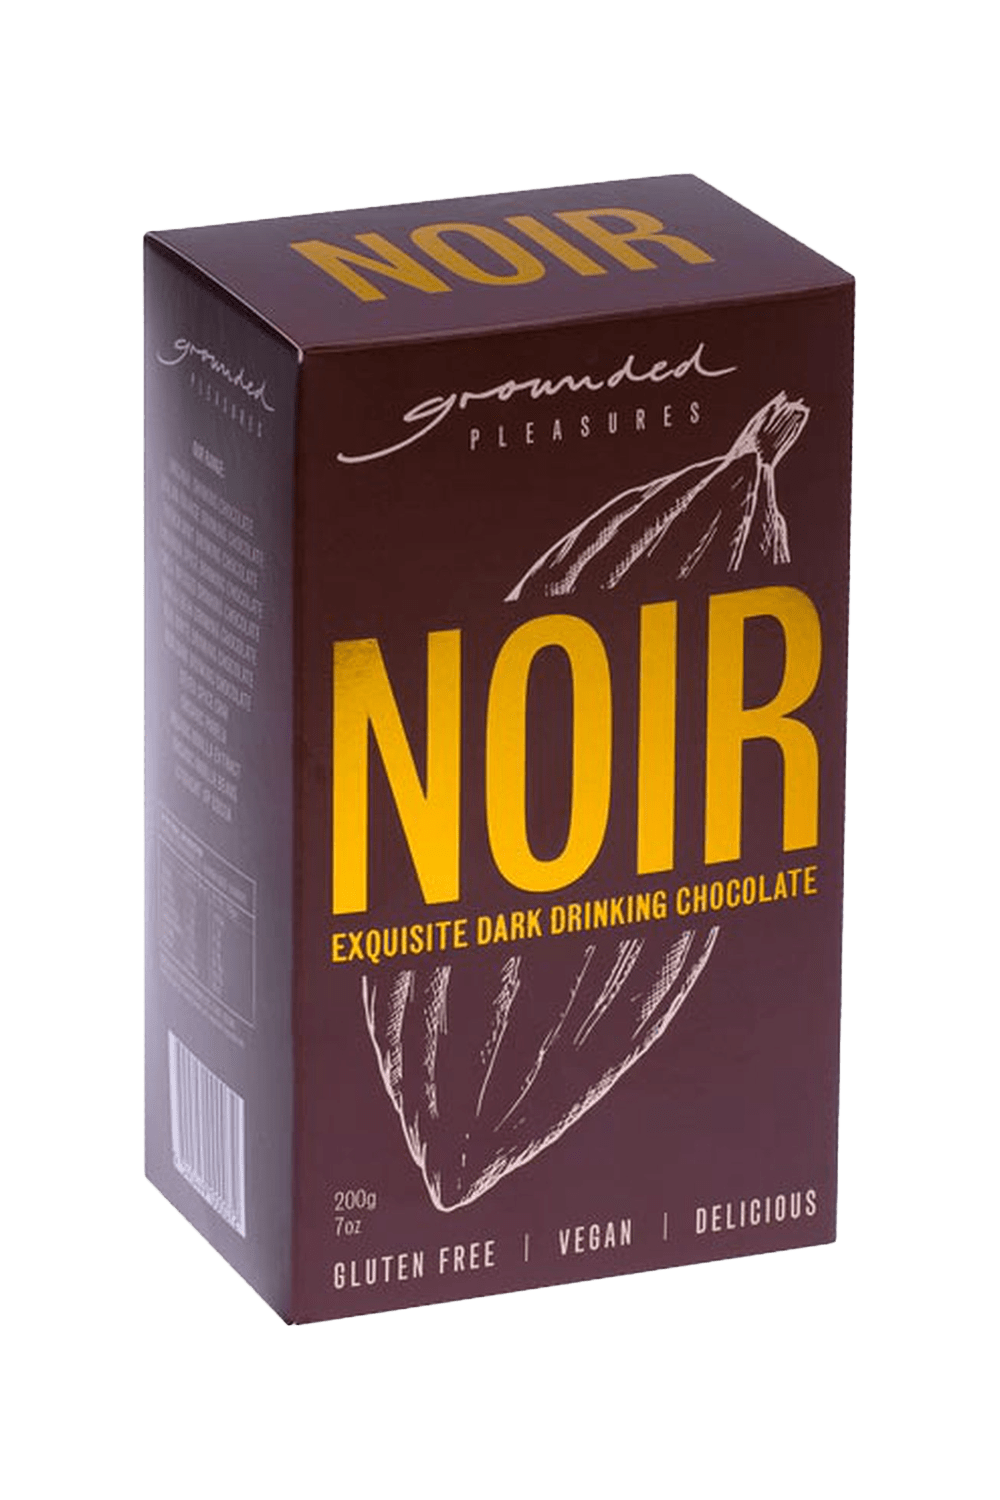 buy cafe products grounded pleasures drinking chocolate noir dark